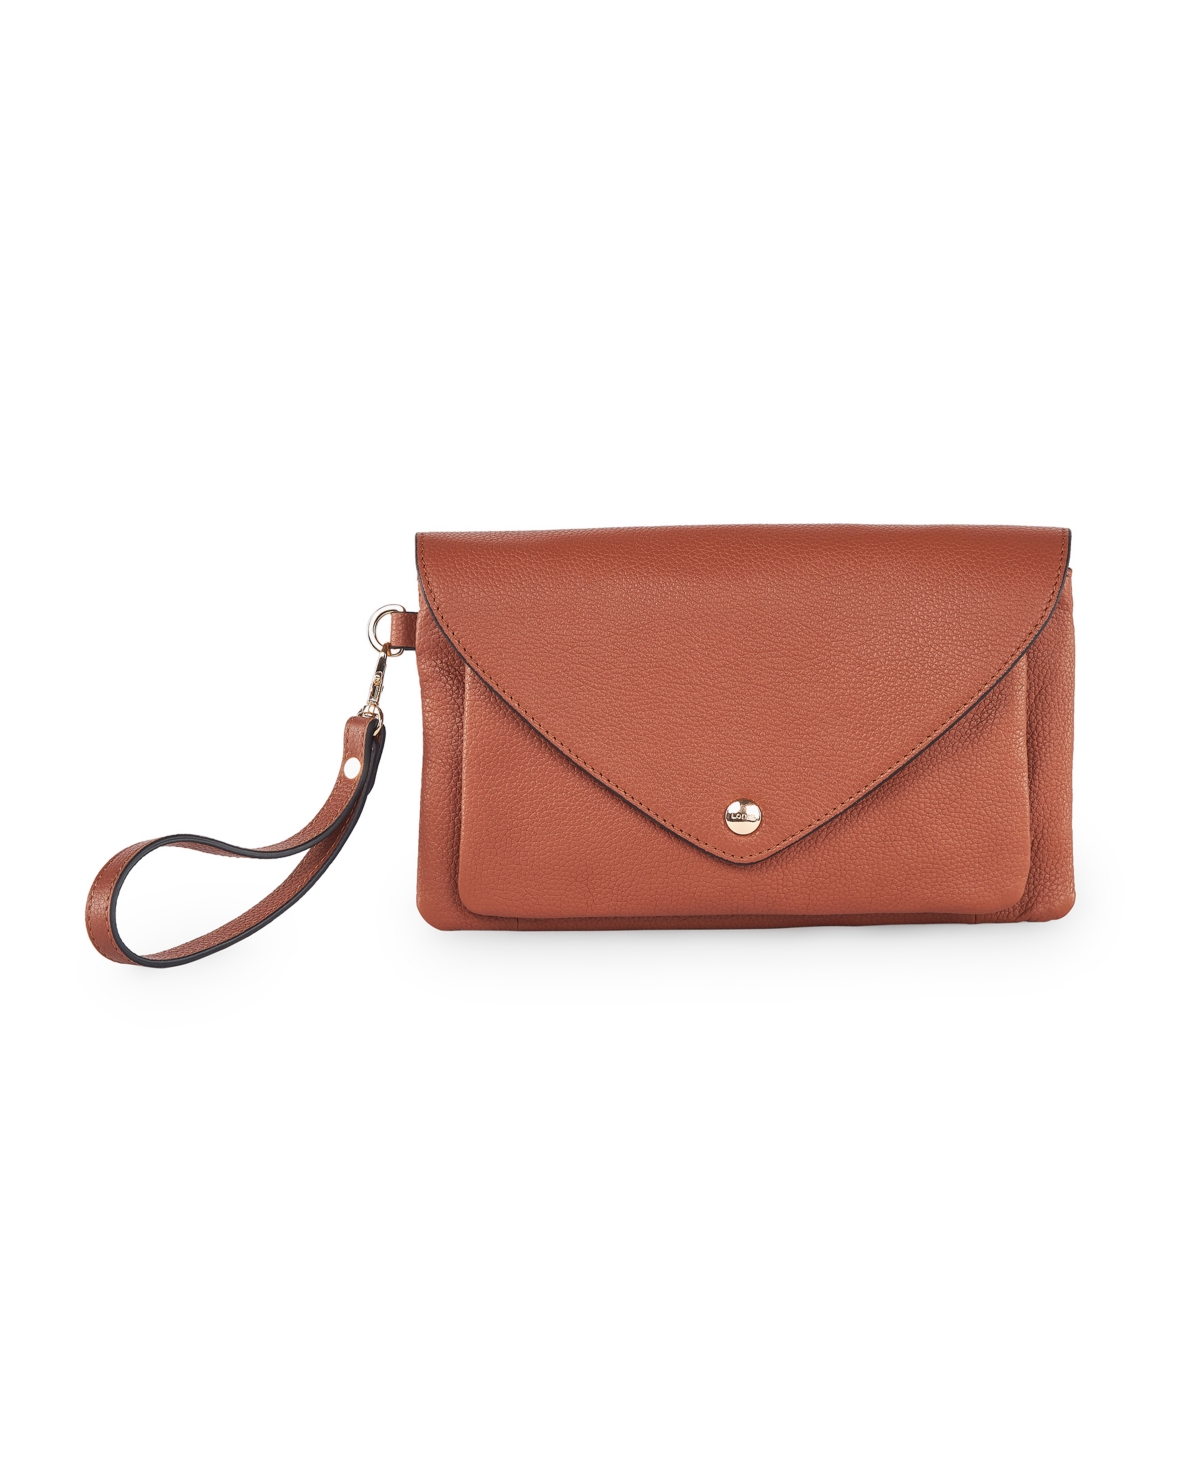 Lodis Paige Wos Small Bag In Chestnut